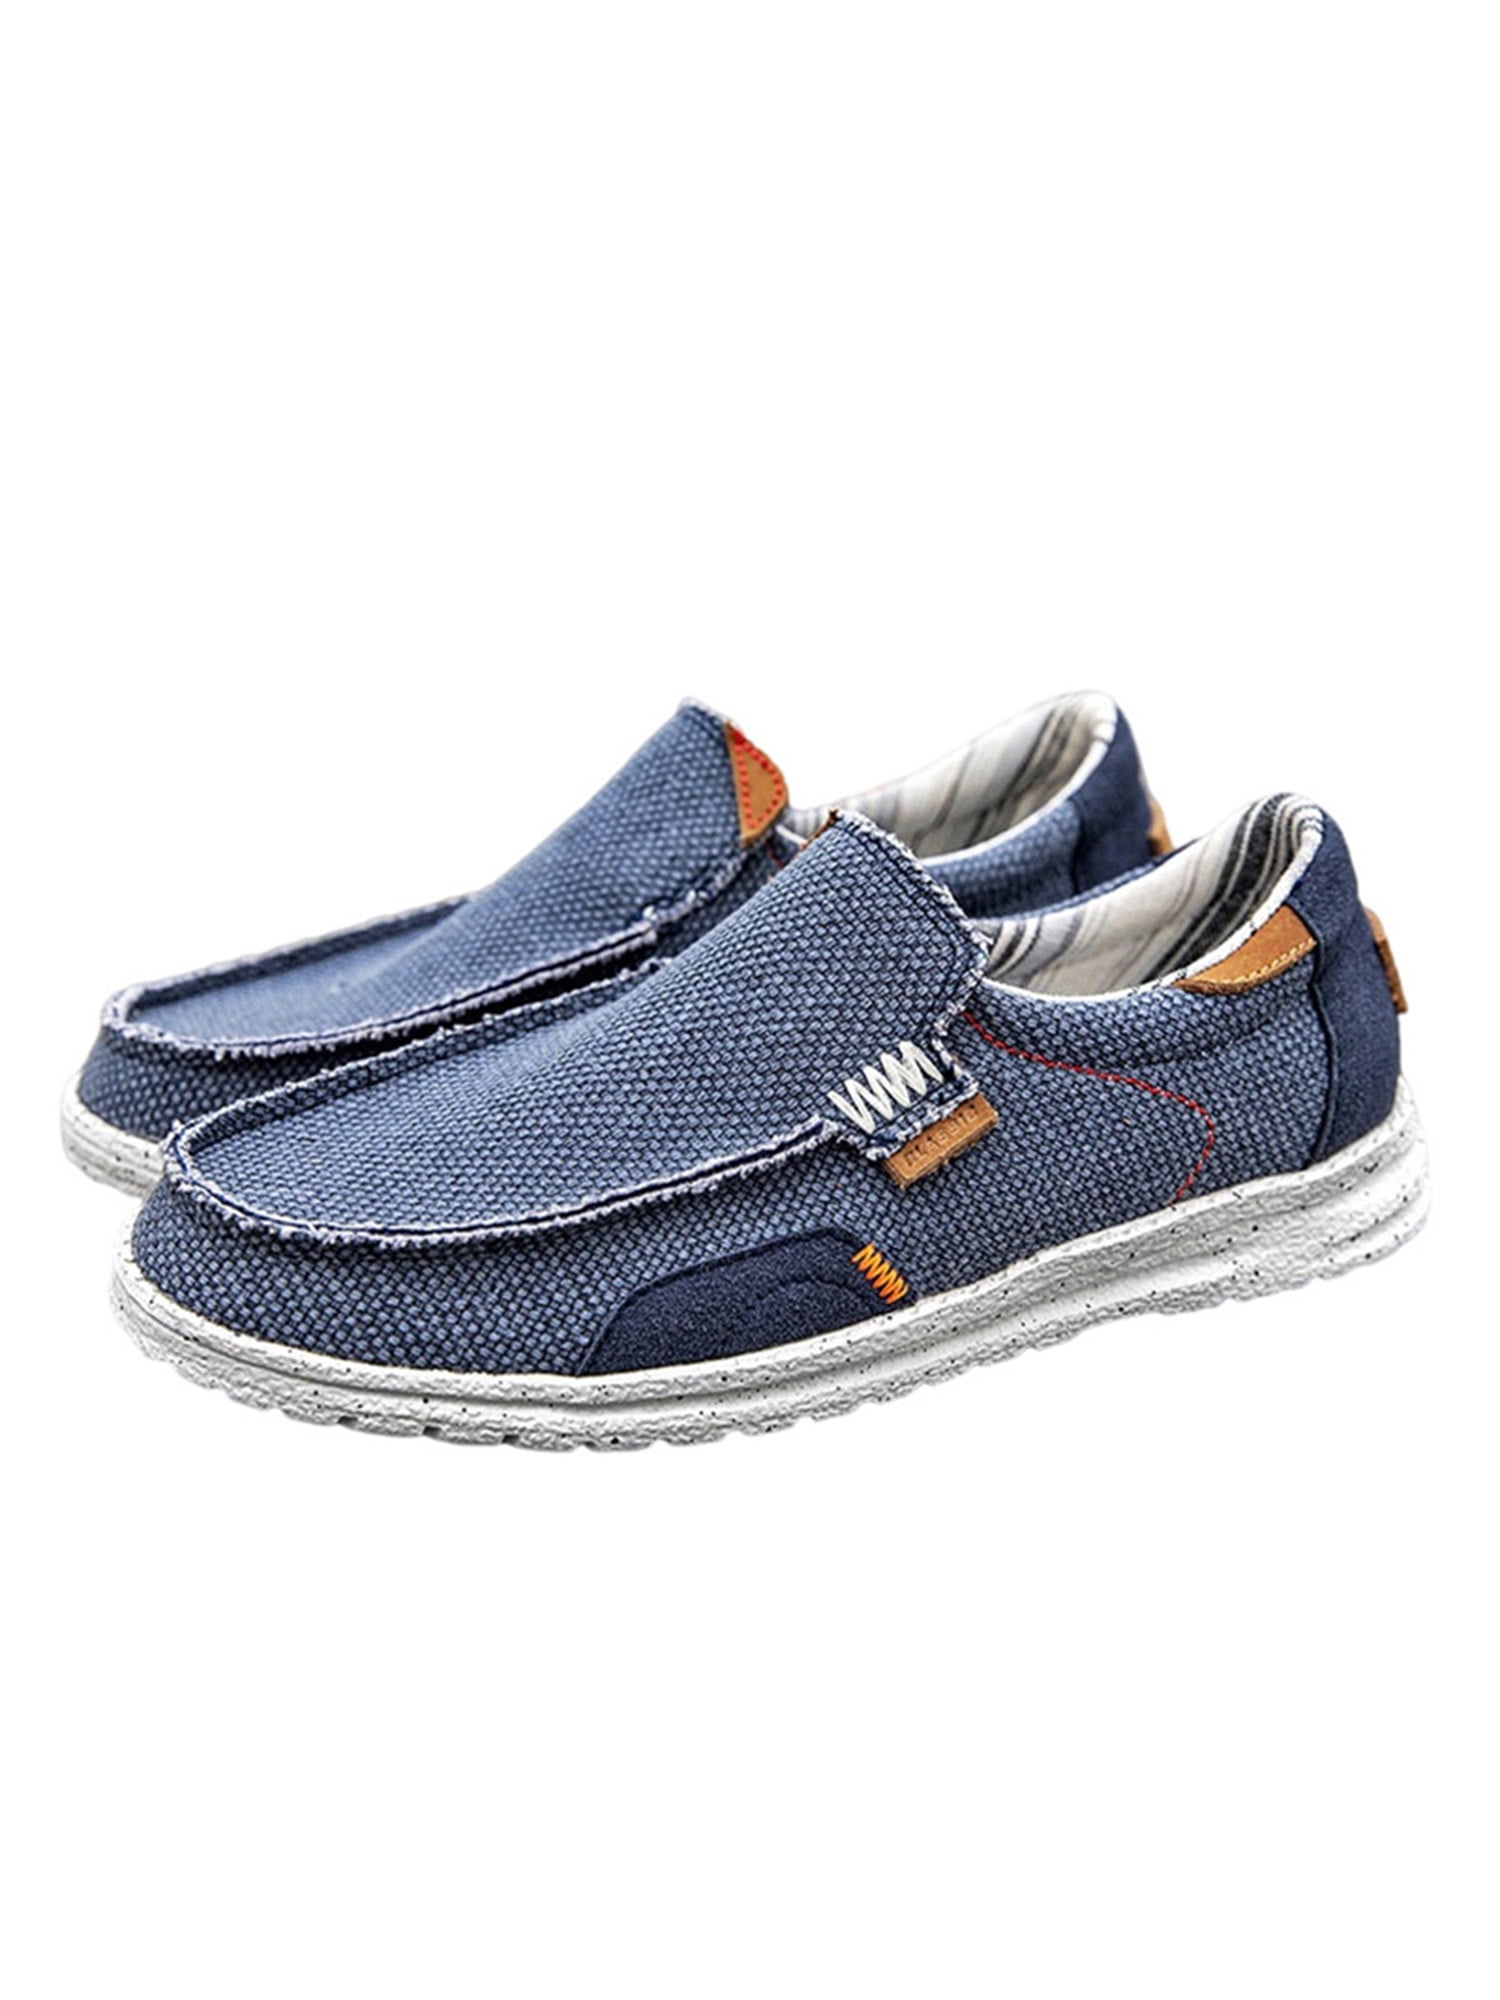 Men's Sneakers Casual Loafers Slip On Low Top Canvas Shoes Driving 